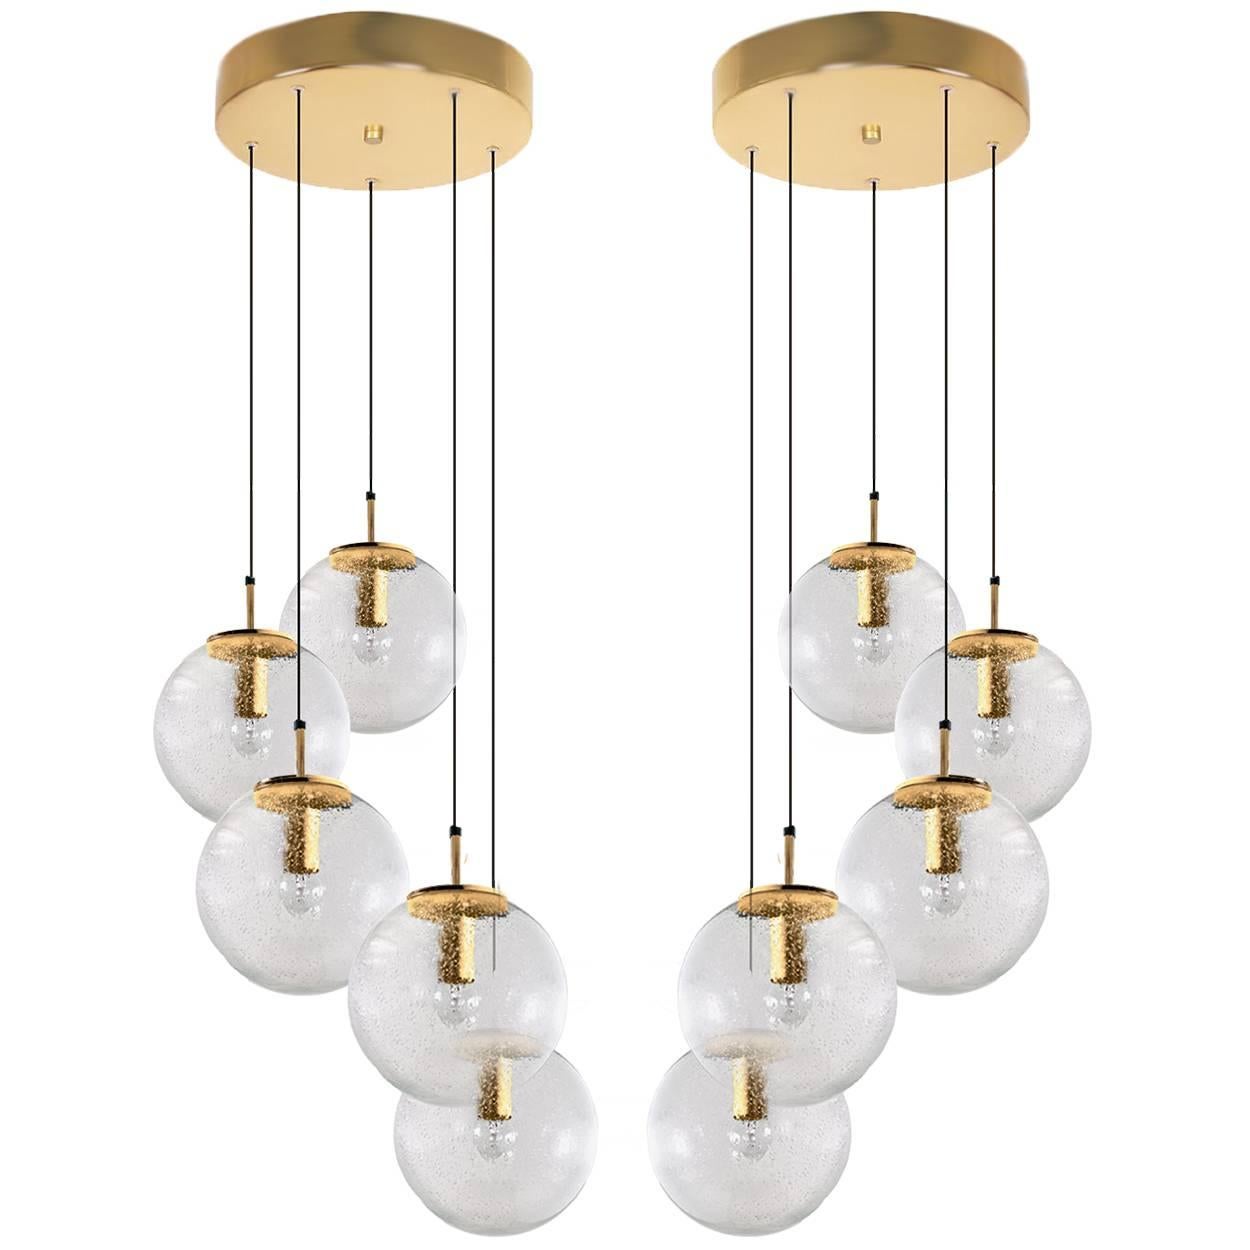 1 of 4 absolutely amazing huge ceiling mount pendant light fixtures with five globes or spheres by Limburg Glashütte. With handblown glass pendants. Complete with a special new custom-made ceiling plate for five globes. Very suitable for building